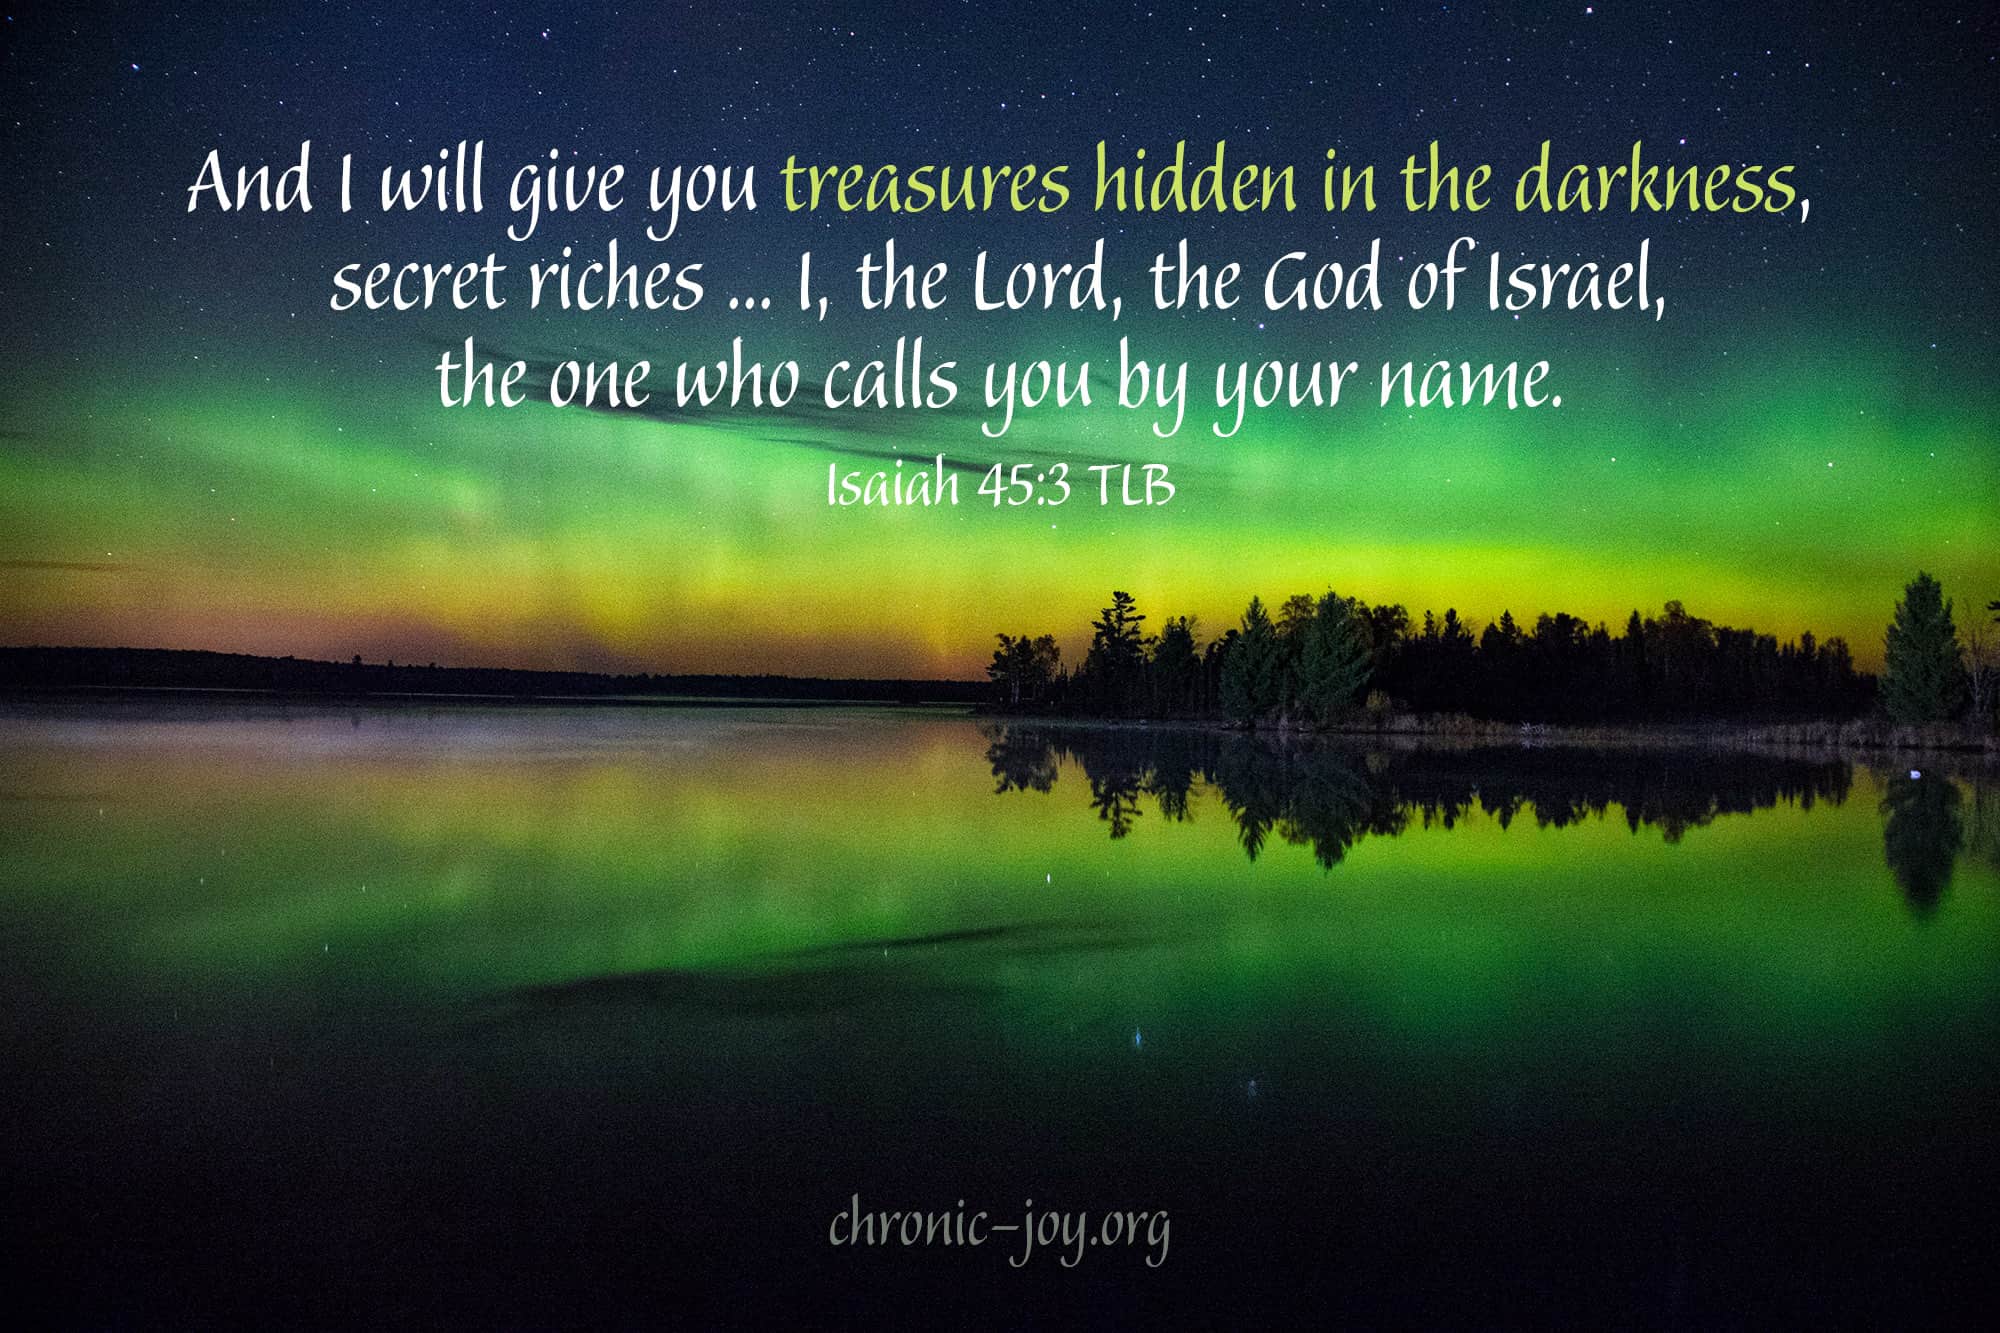 "And I will give you treasures hidden in the darkness, secret riches ... I, the Lord, the God of Israel, the one who calls you by your name." Isaiah 45:3 TLB